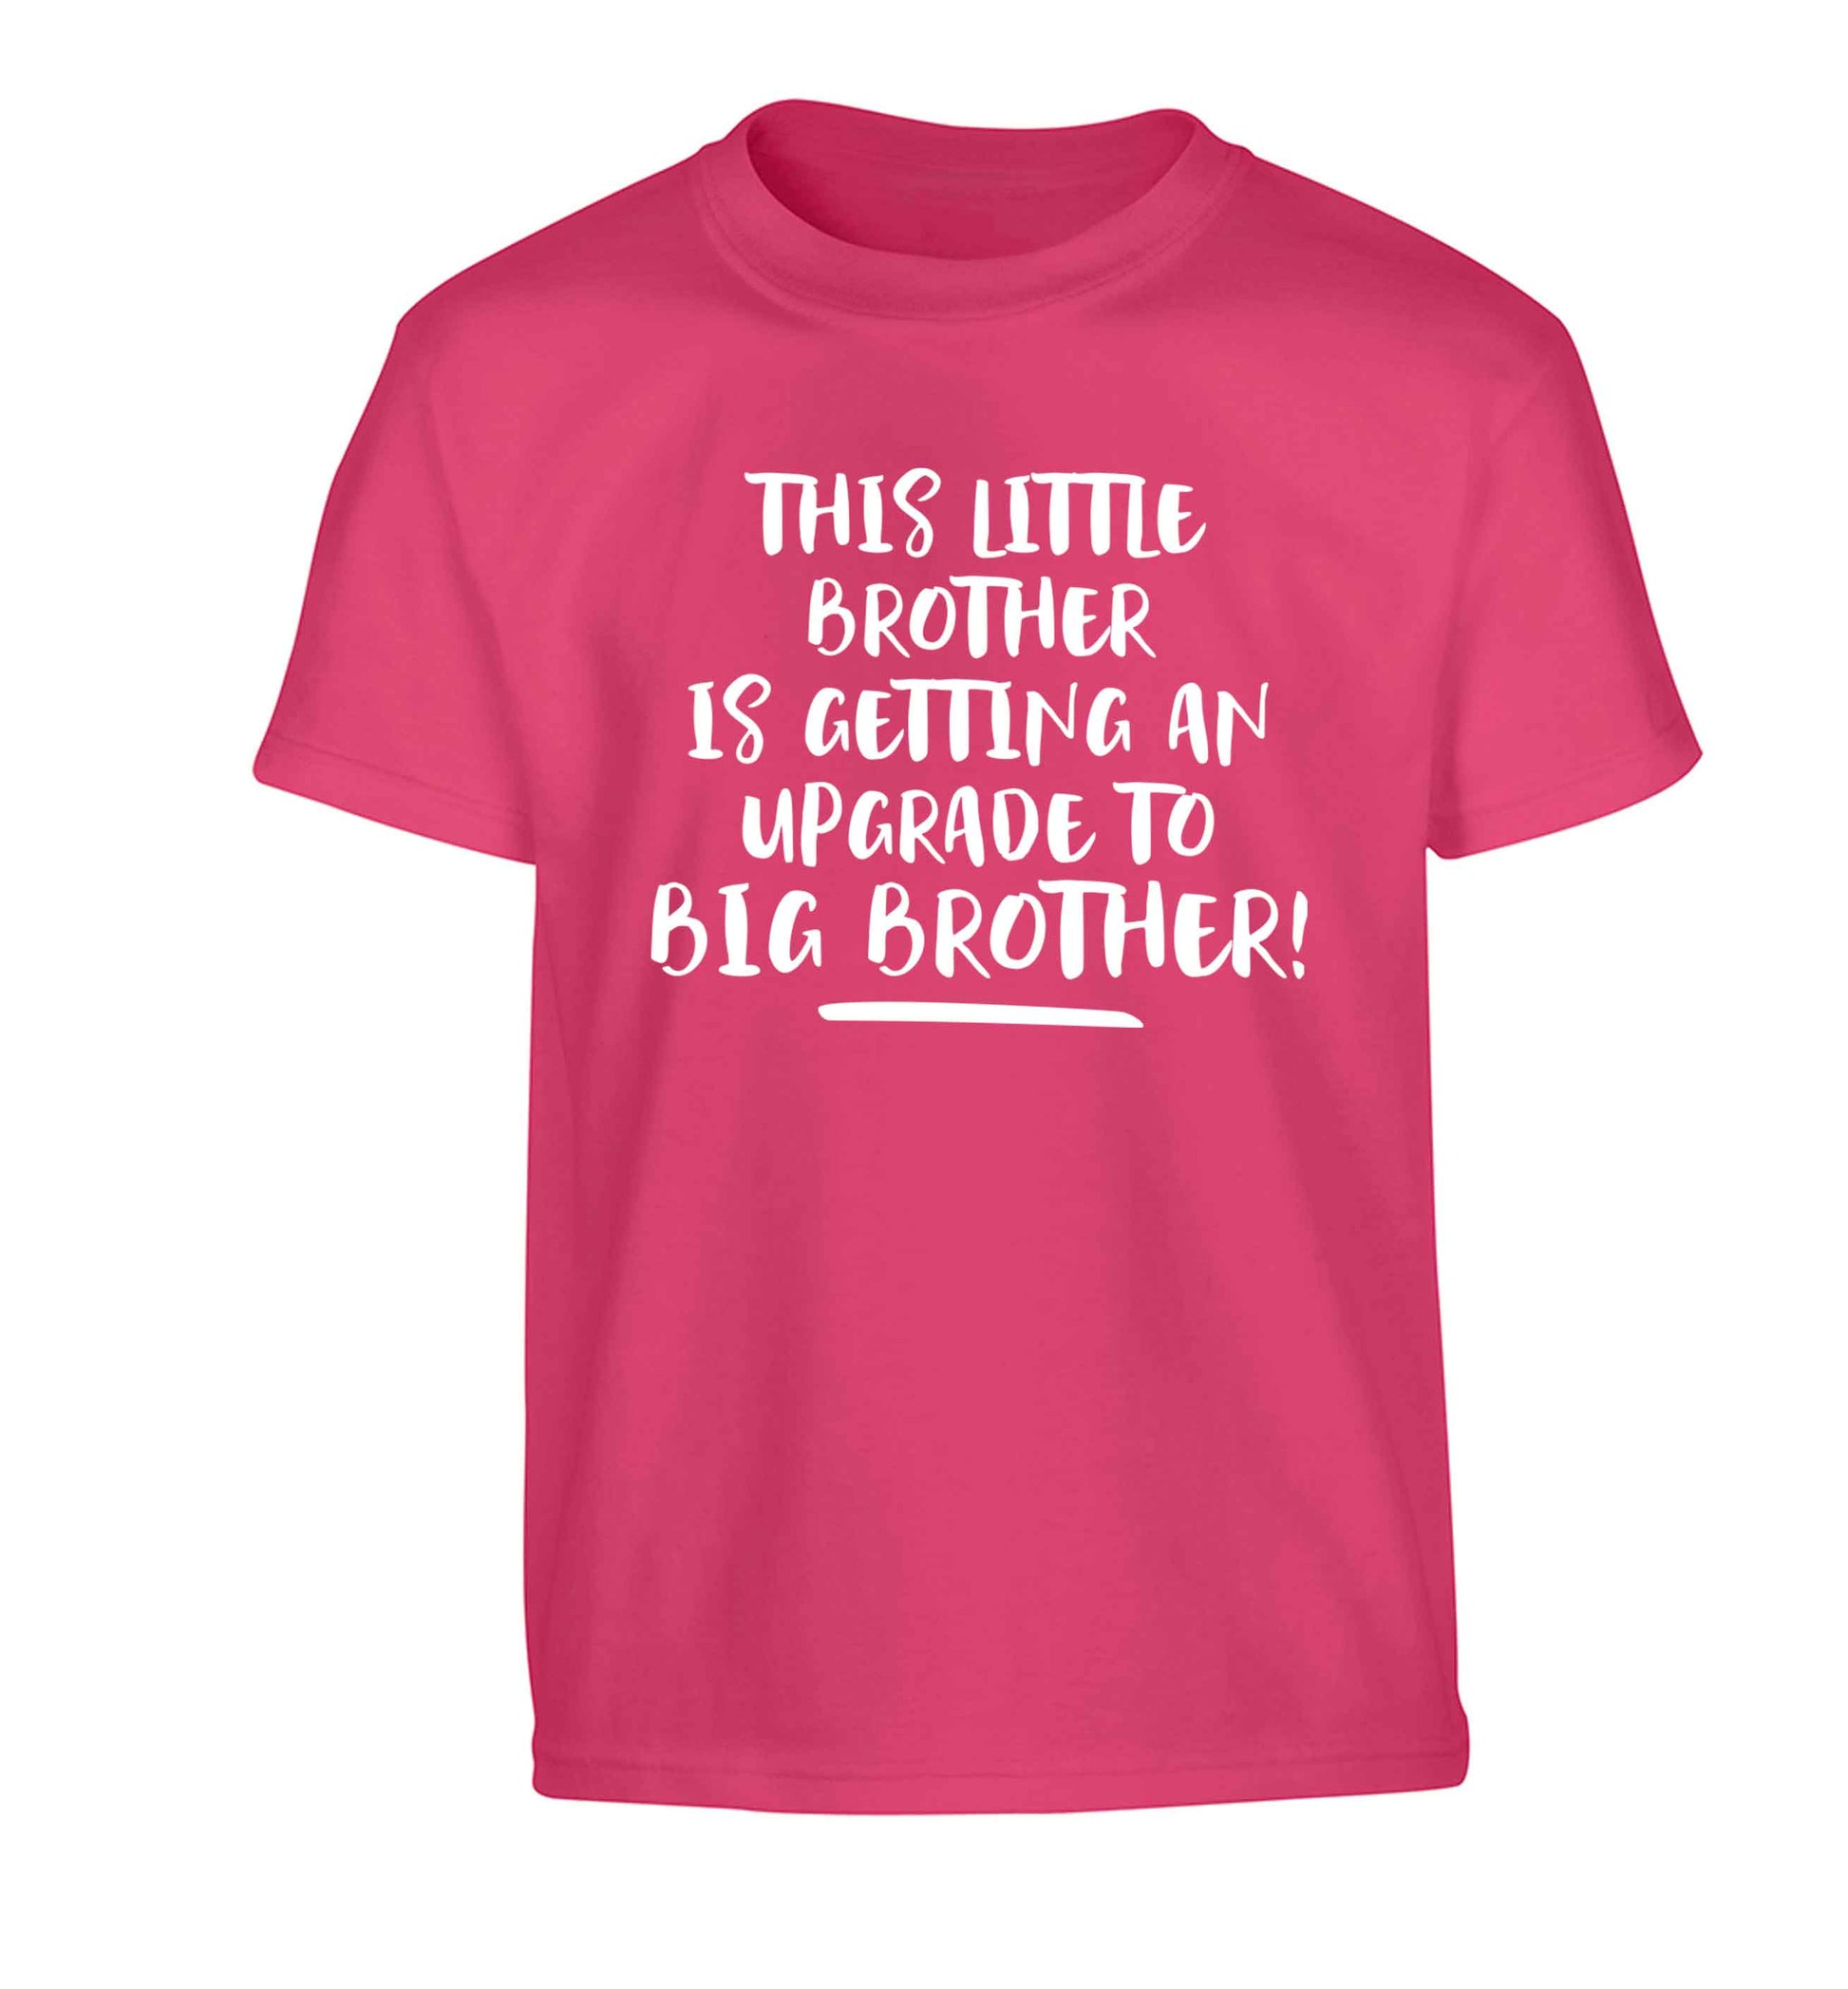 This little brother is getting an upgrade to big brother! Children's pink Tshirt 12-13 Years